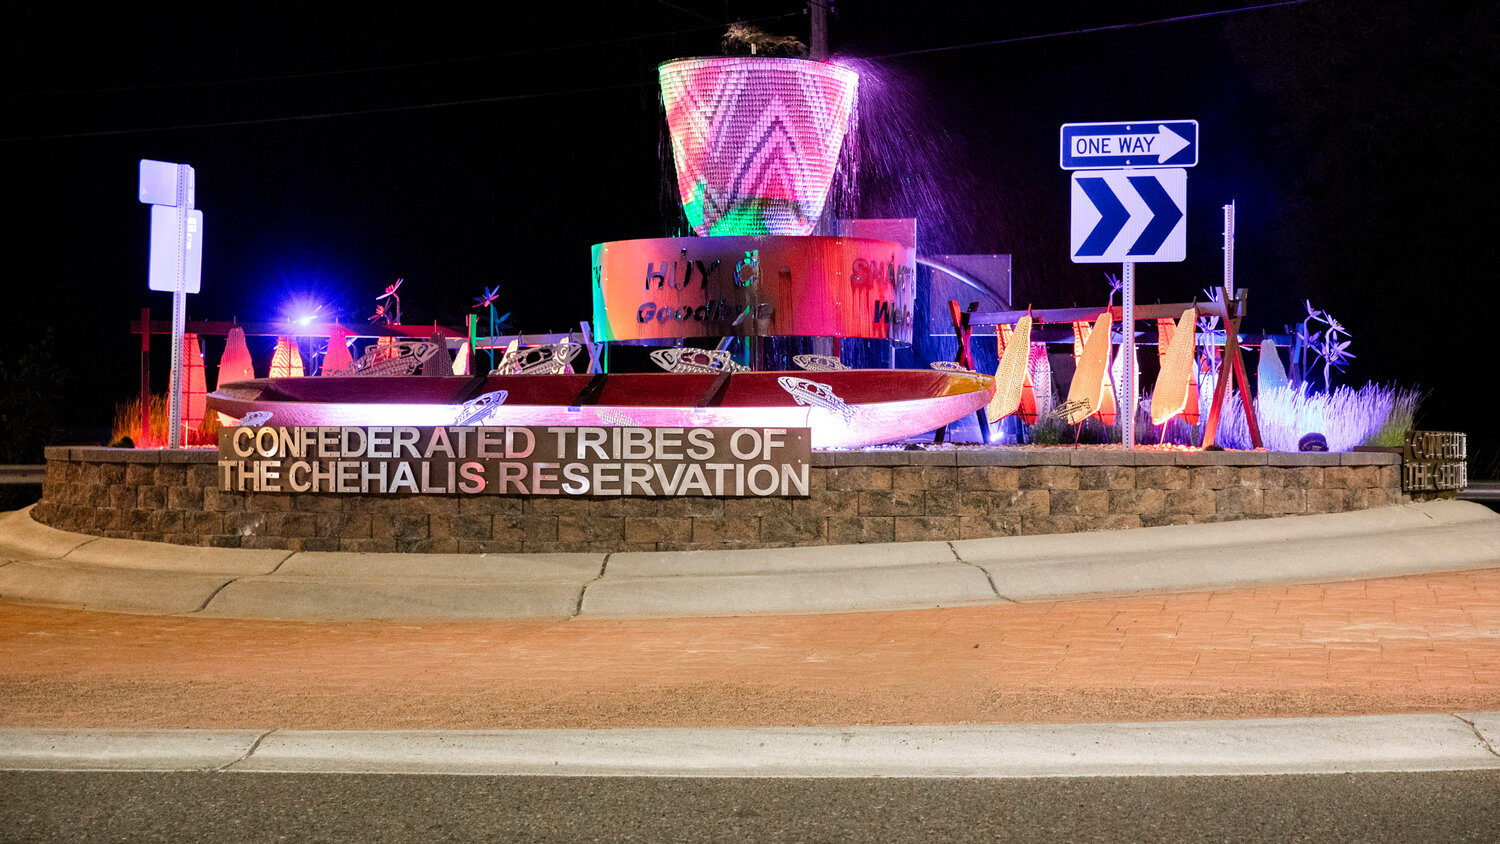 A roundabout decorated with items of significance for the Confederated Tribes of the Chehalis Reservation is illuminated along Anderson Road near Oakville on Friday, July 7.